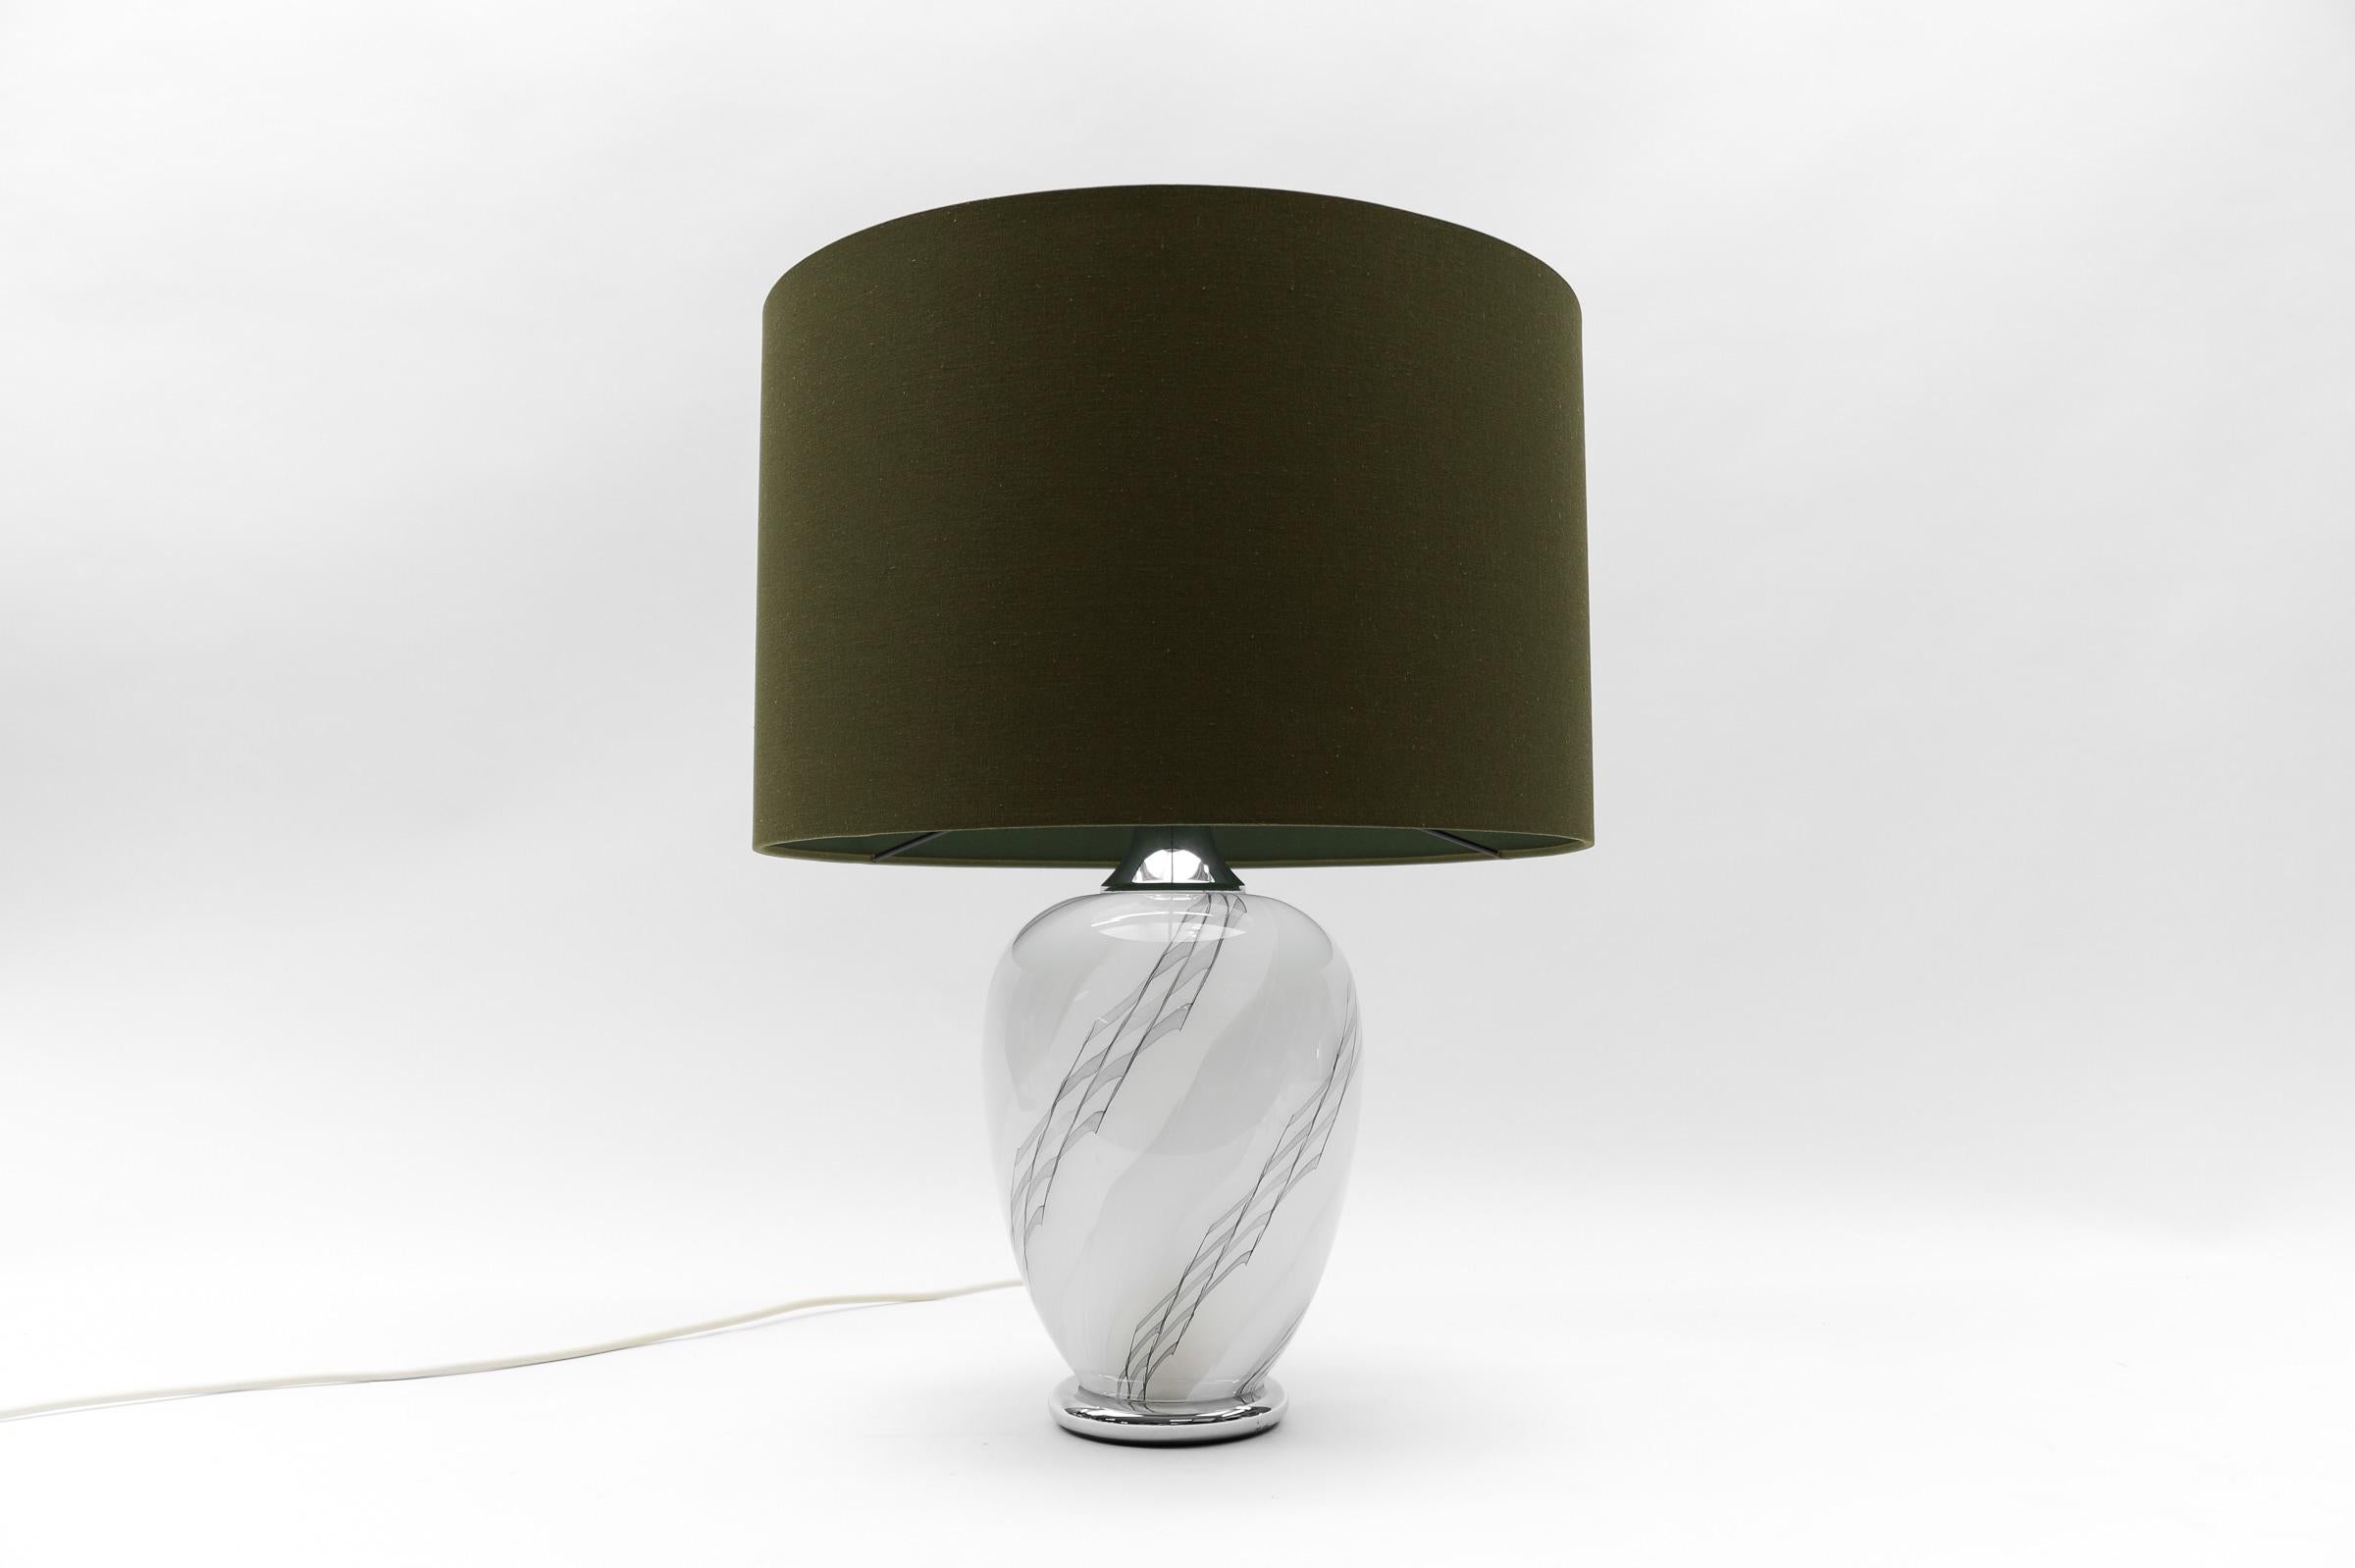 Mid Century Modern Chrome & Illuminated Glass Table Lamp Base, 1960s Germany

The lampshade is to illustrate how the lamp base looks with a shade. The shade has a diameter of 45cm.

The lamp can be lit thanks to the switch both top and bottom